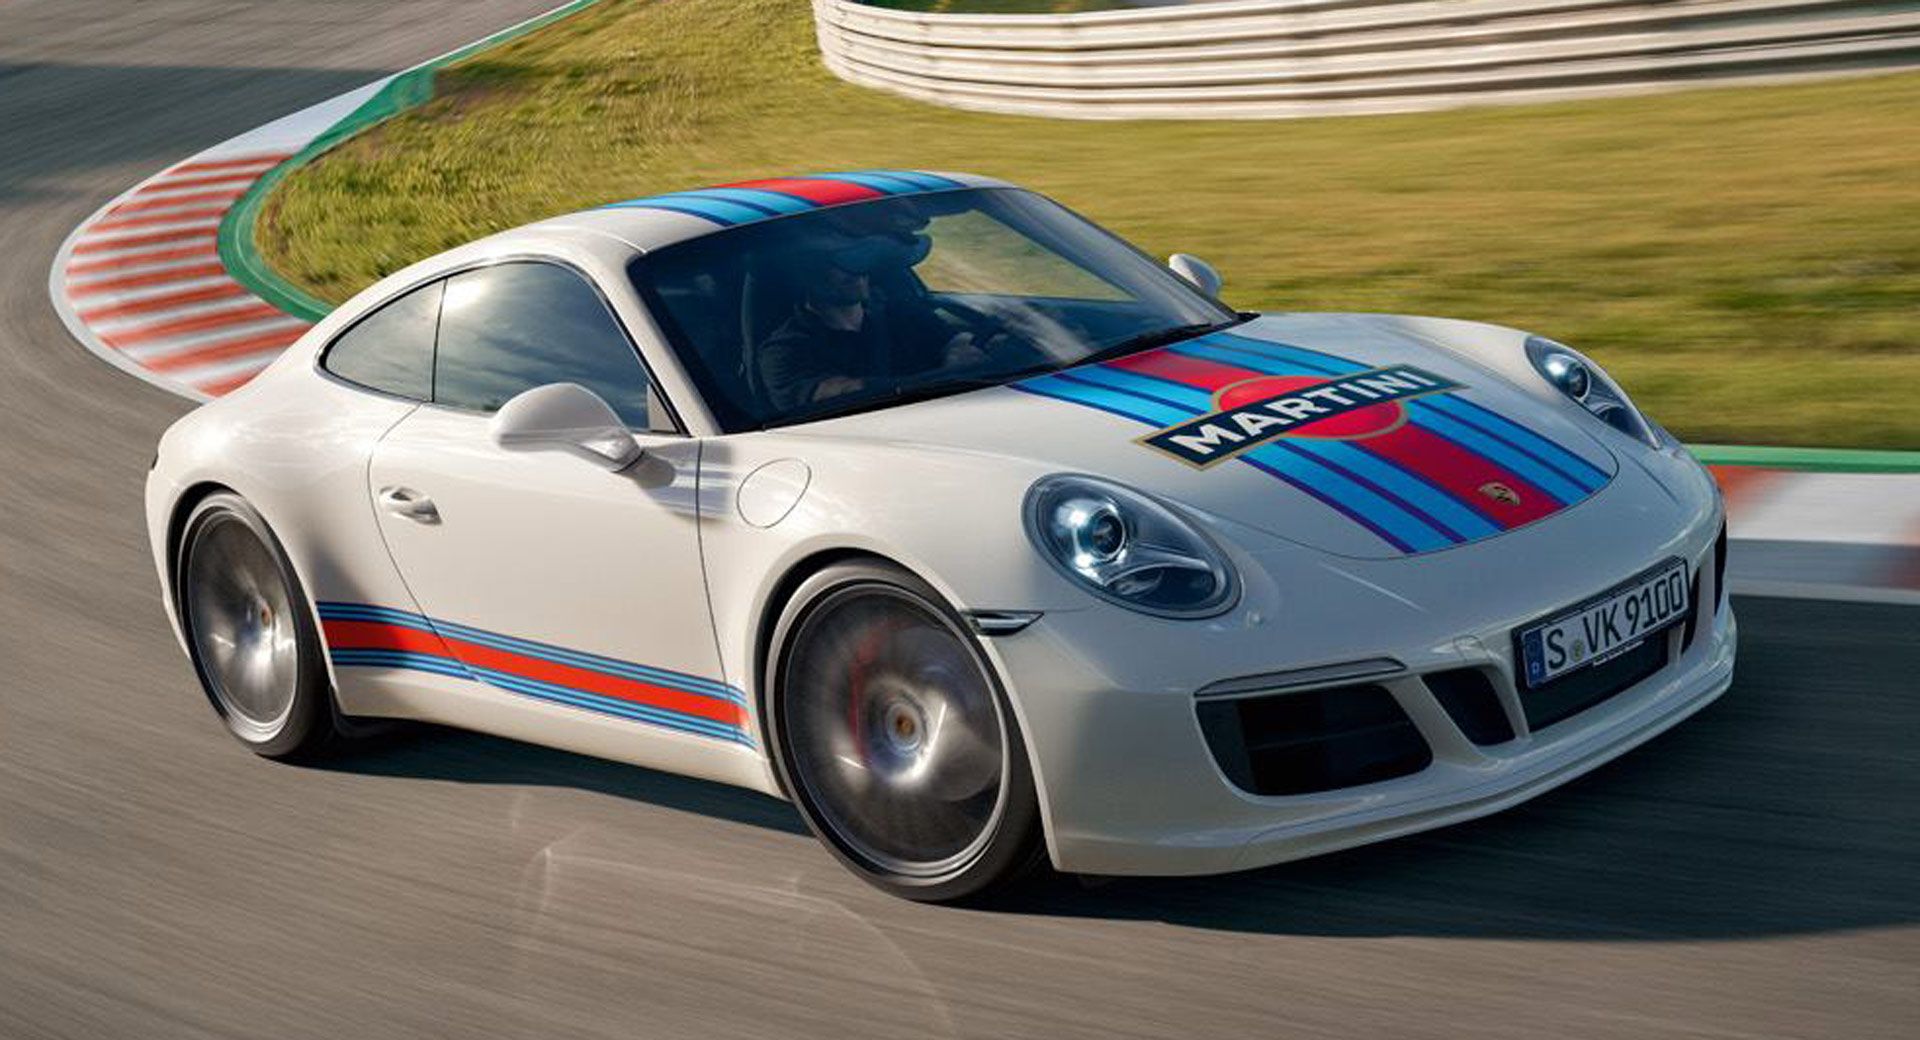 Deck Out Your New 911 In Martini Racing Stripes | Carscoops